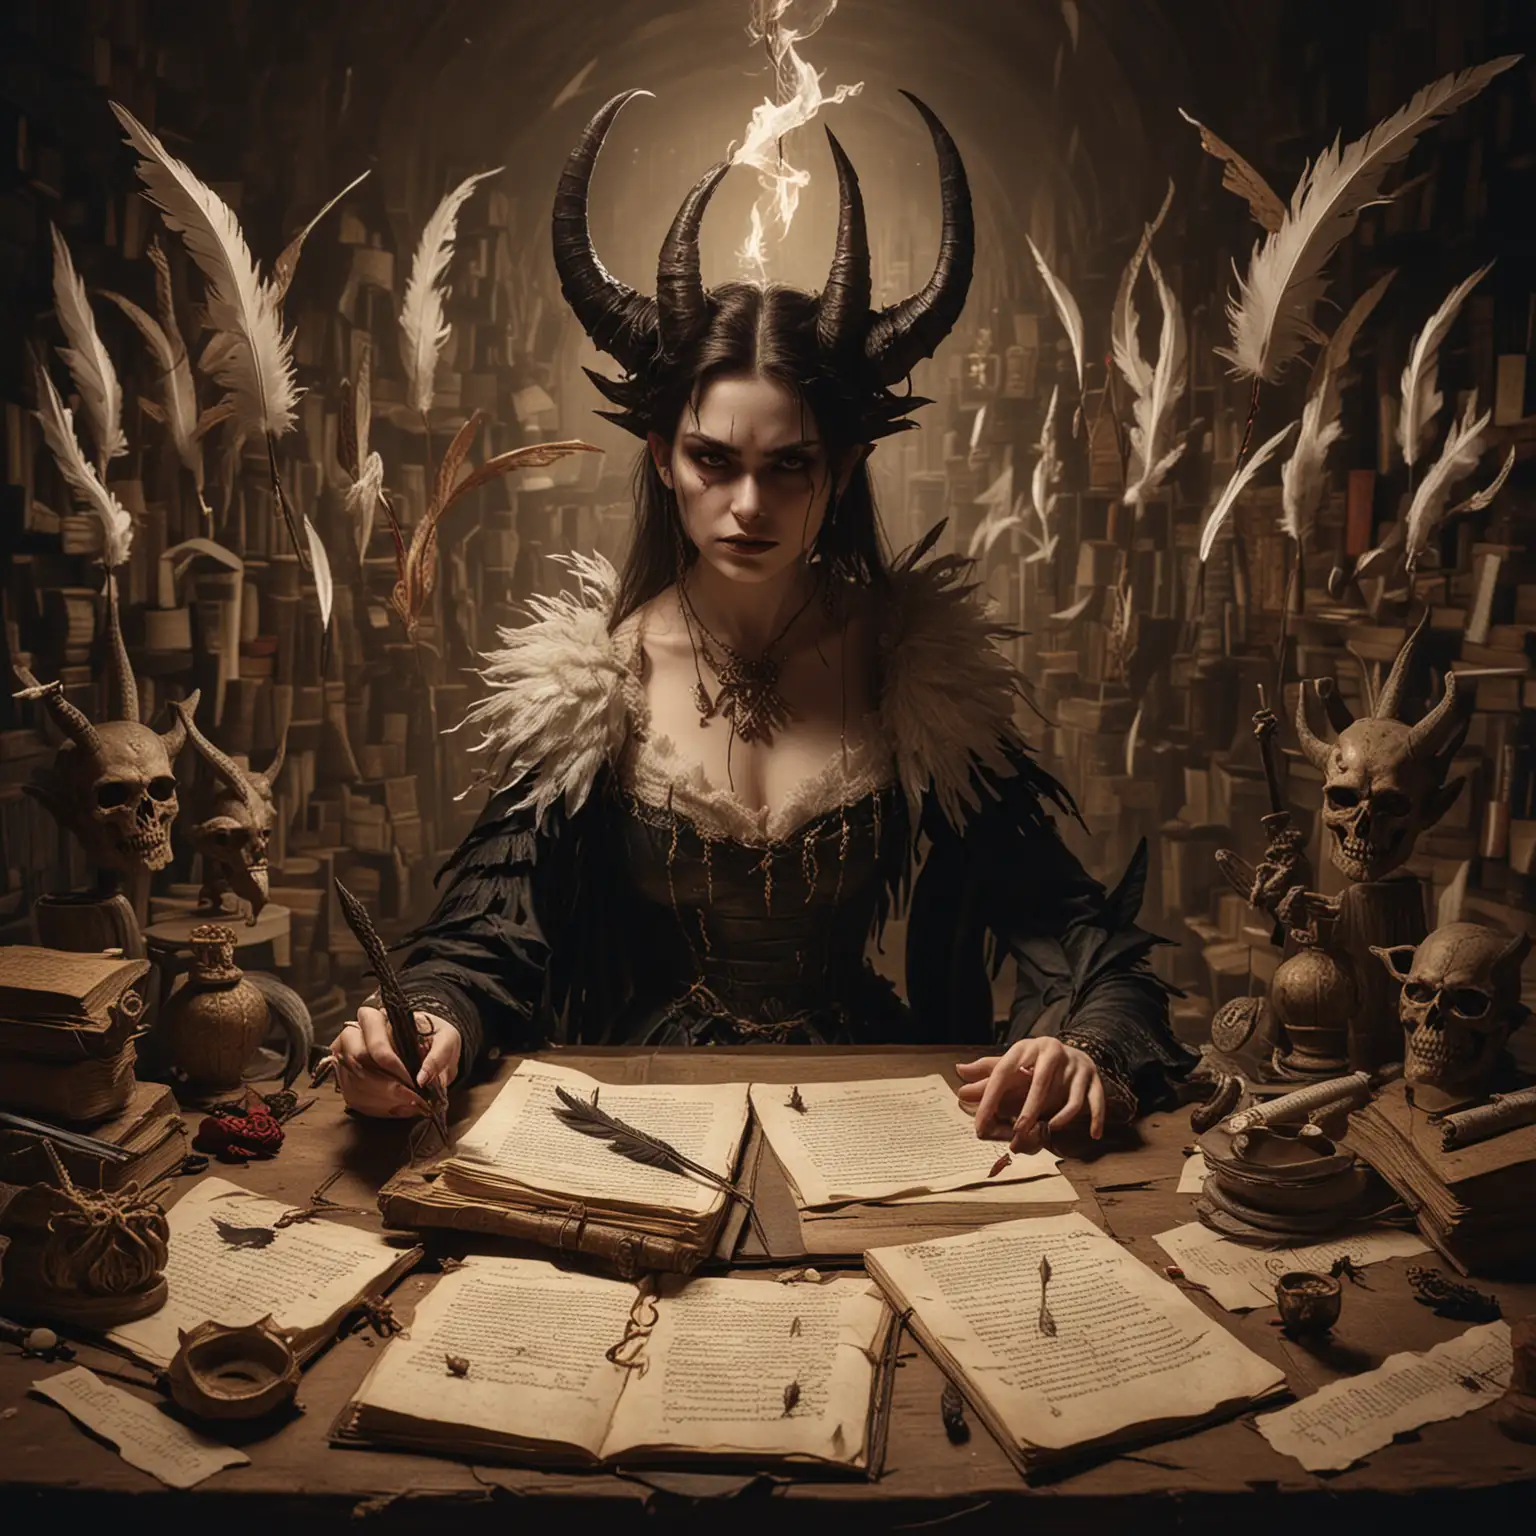 Female Demon Surrounded by Manuscripts Writing with a Feather Quill